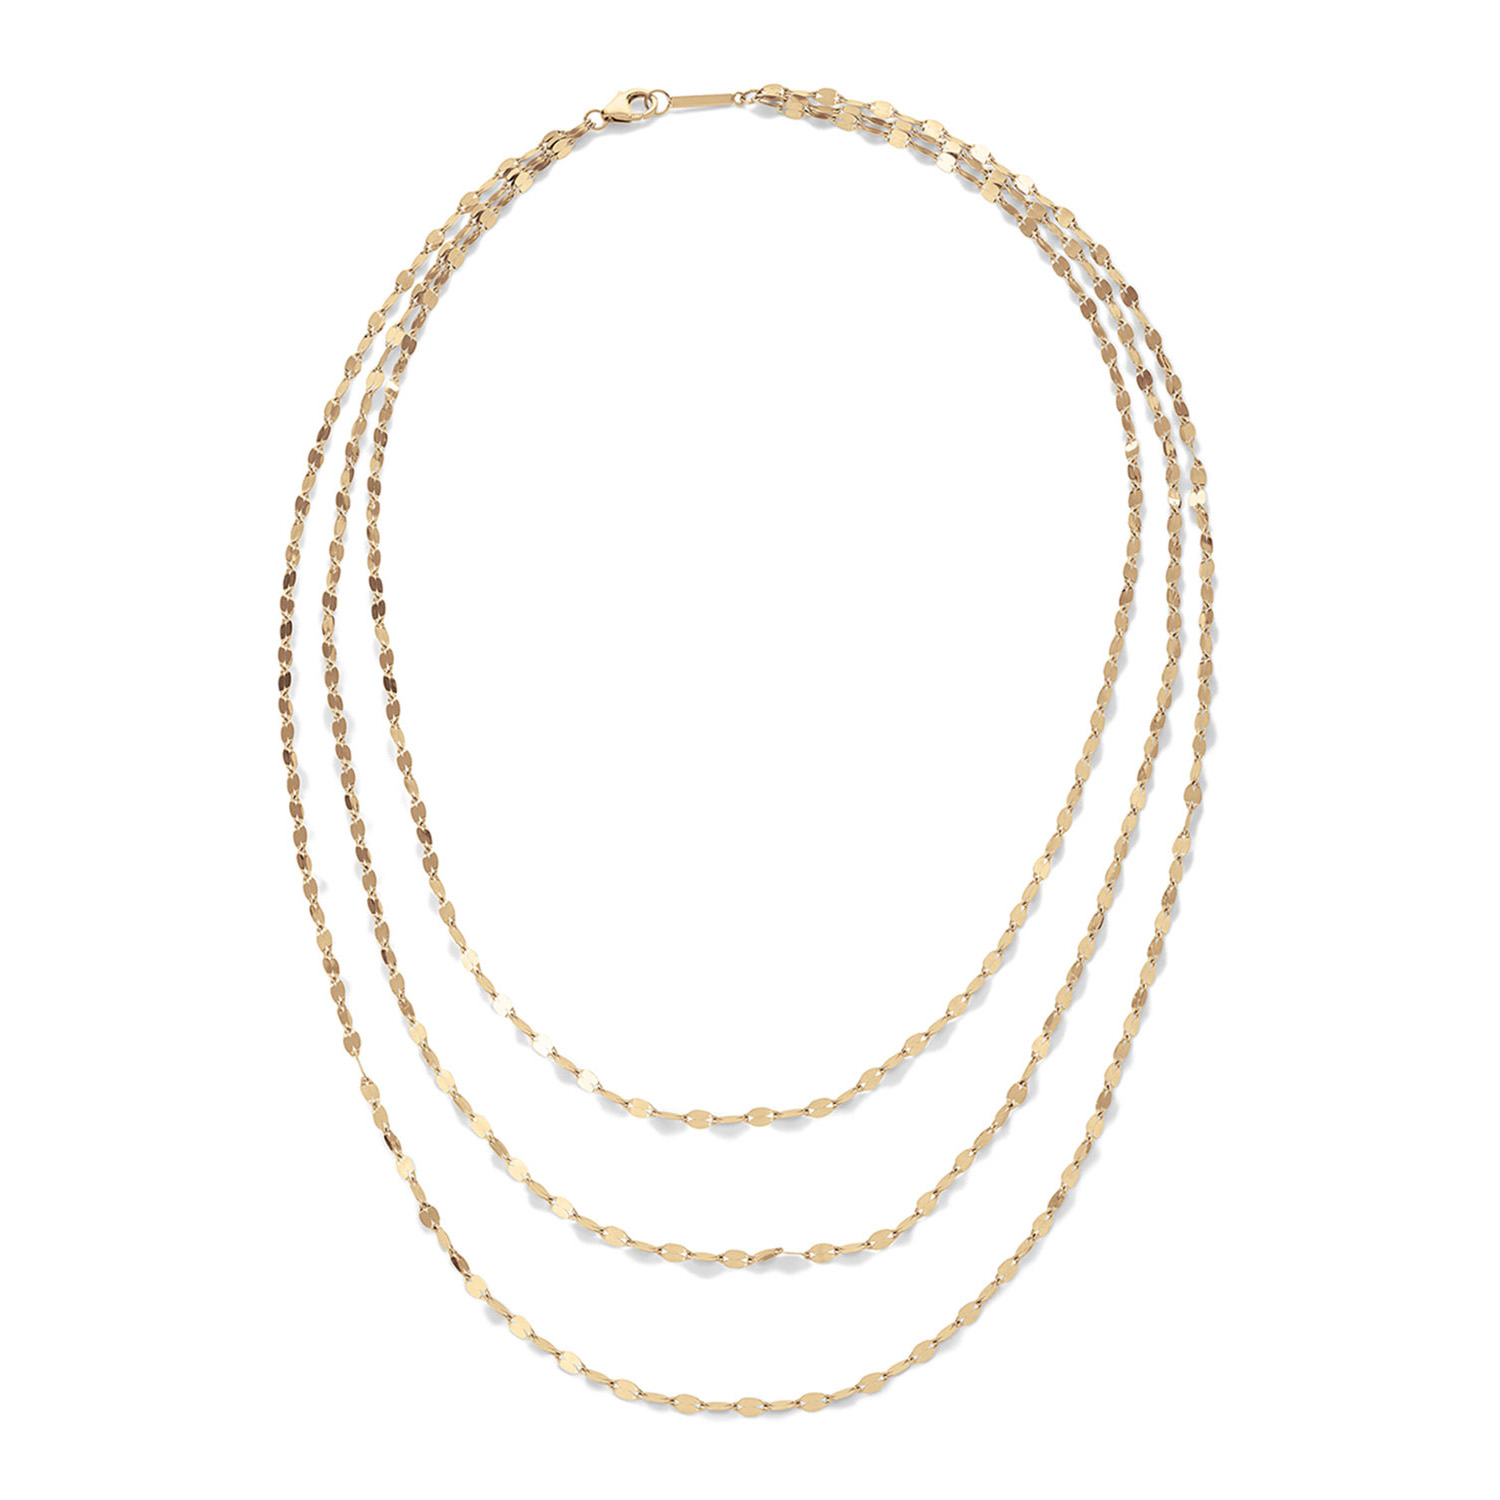 Wholesale Custom Design Multi Necklace sterling silver base and plated in 18k gold vermeil OEM/ODM Jewelry